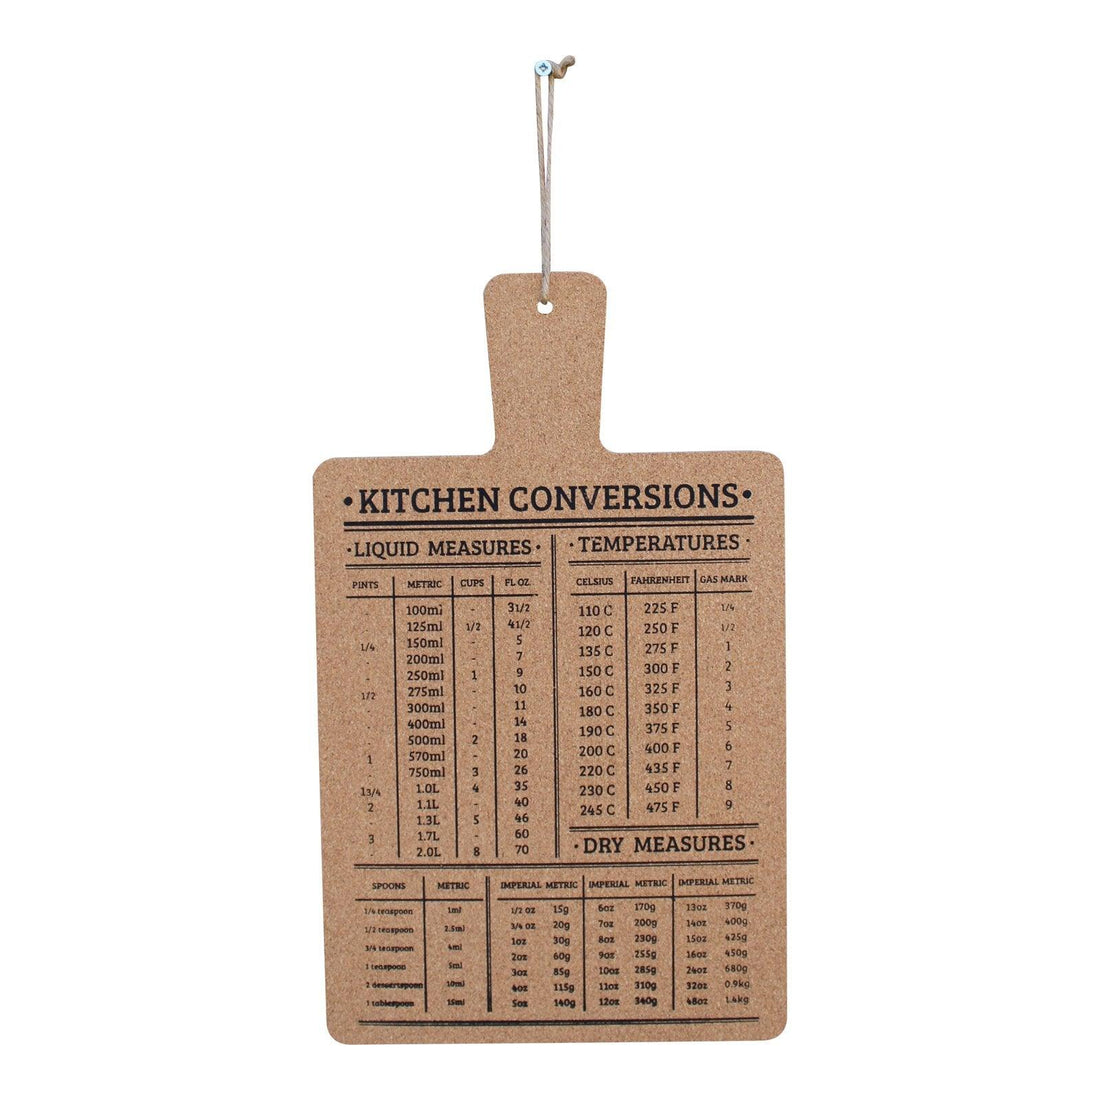 Hanging Cork Board Featuring Kitchen Conversions Chart - £15.99 - Decorative Kitchen Items 